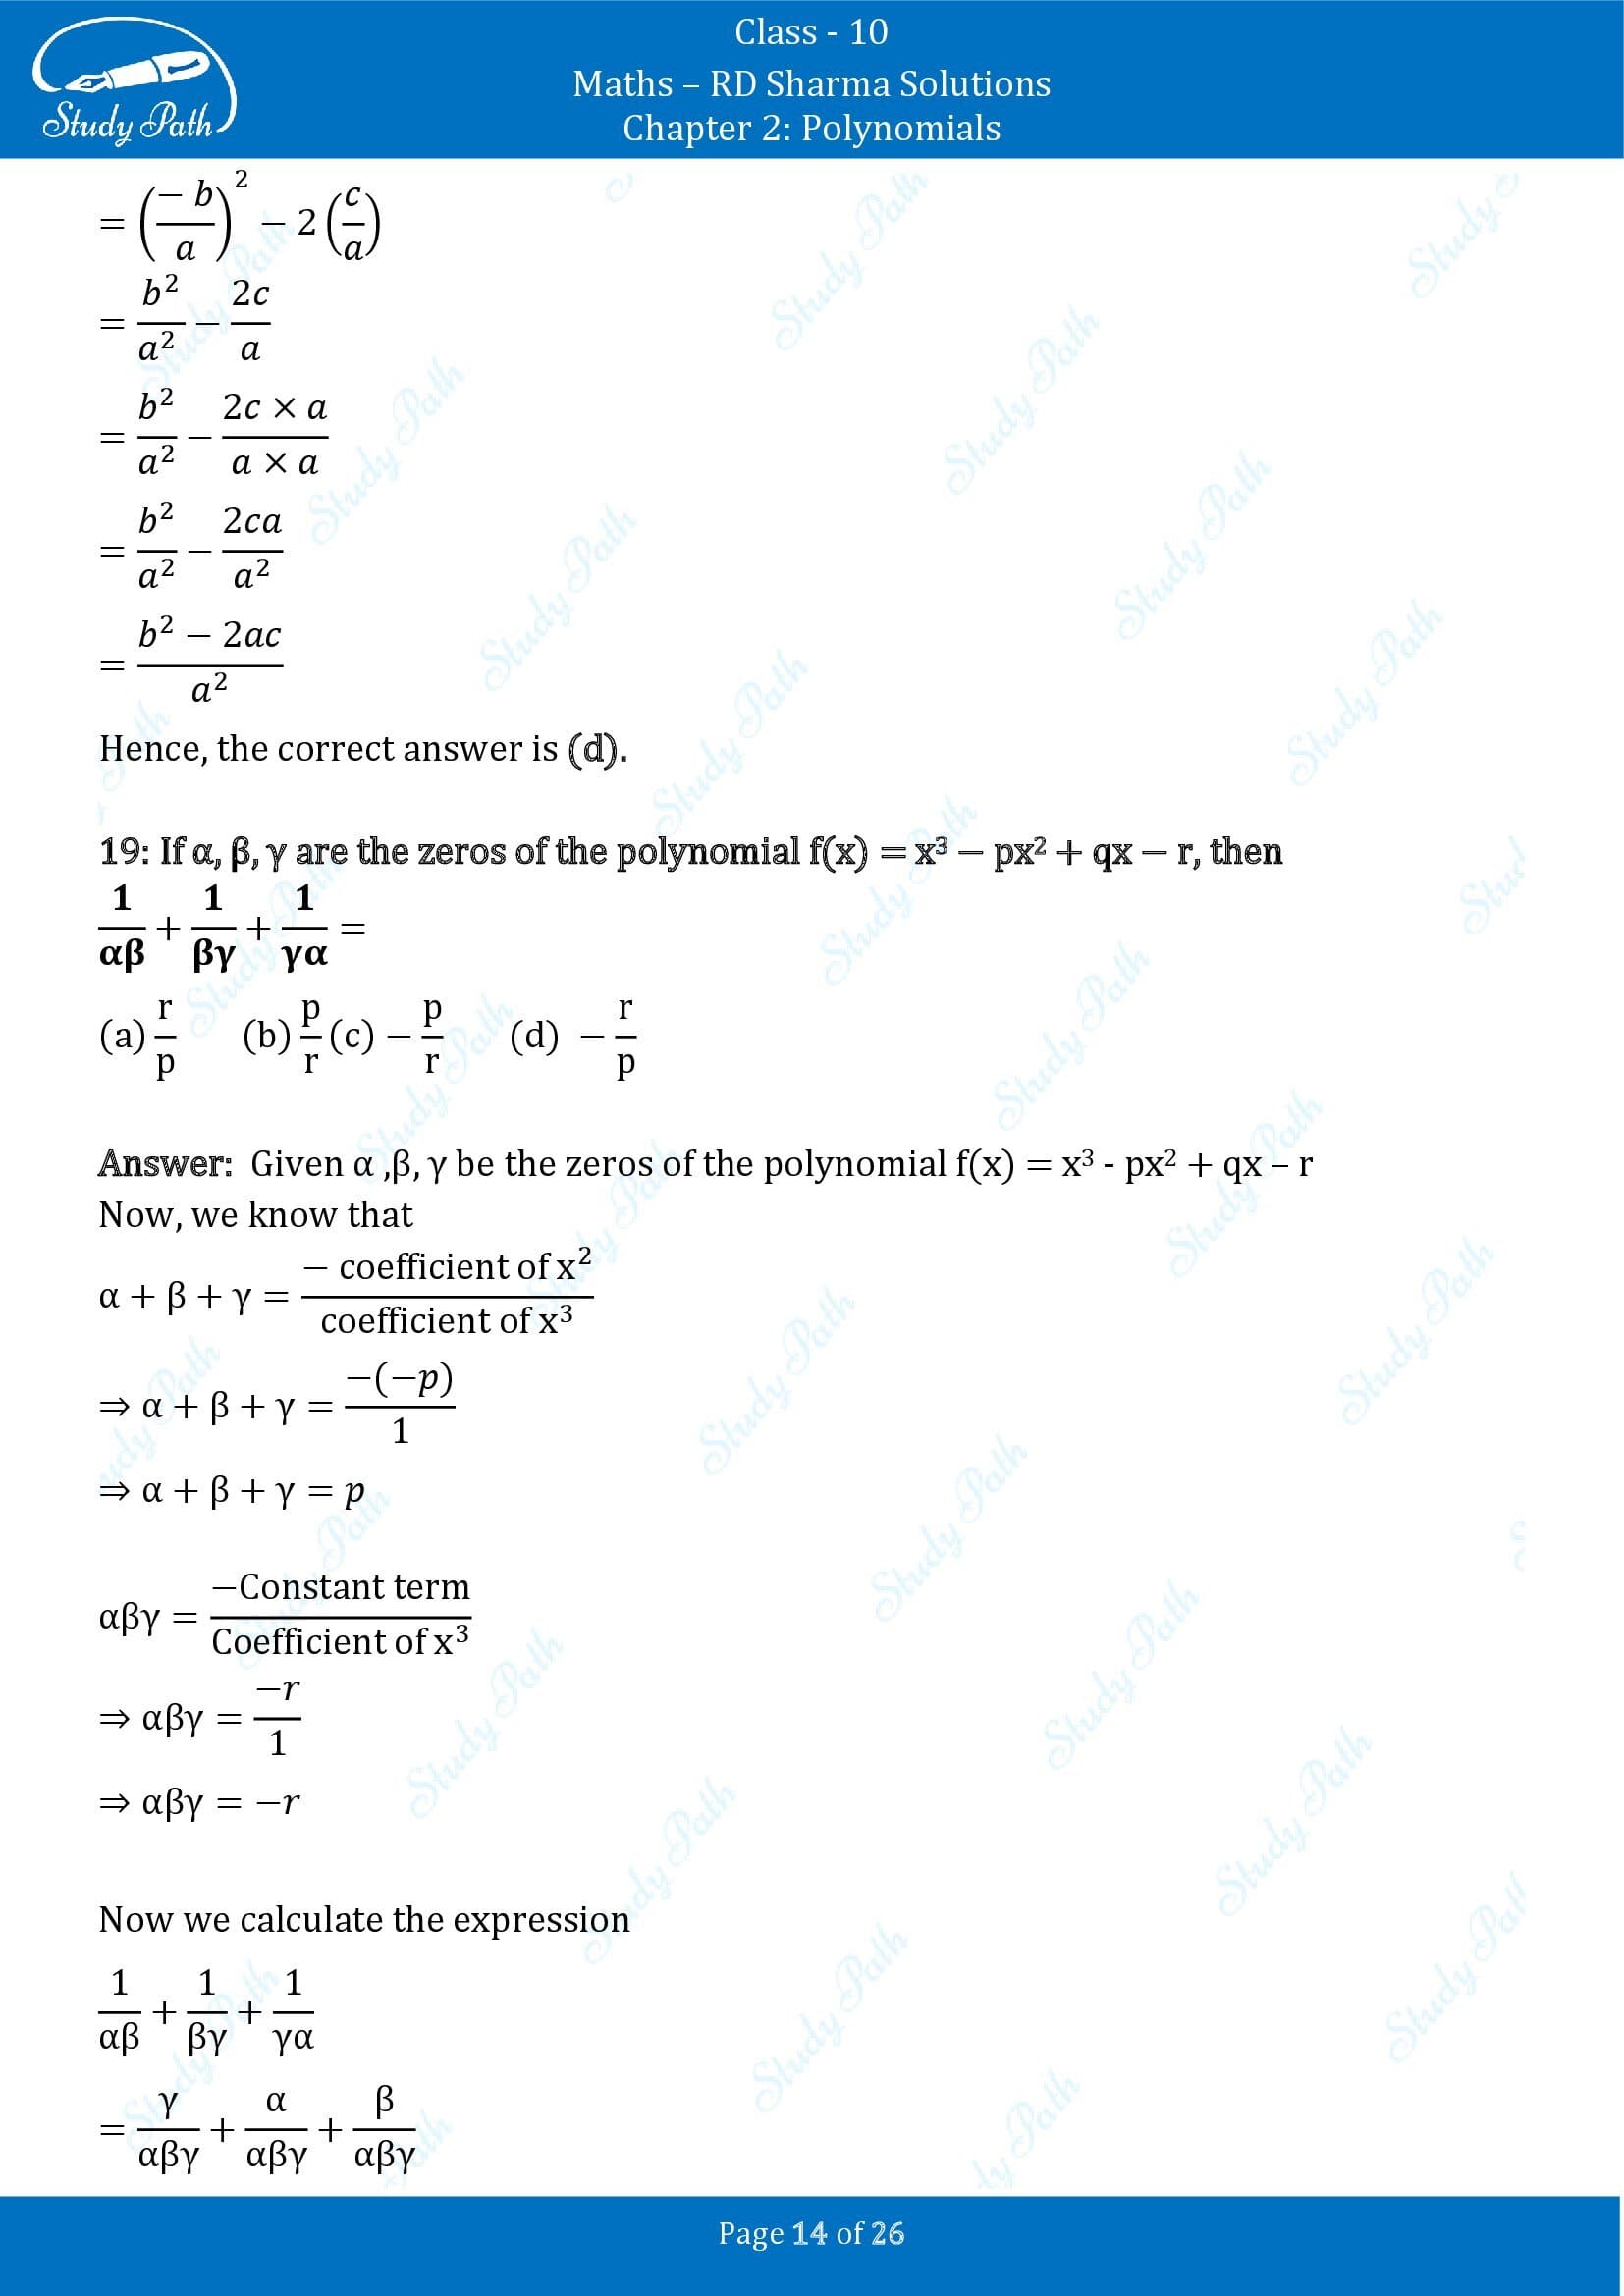 RD Sharma Solutions Class 10 Chapter 2 Polynomials Multiple Choice Questions MCQs 00014